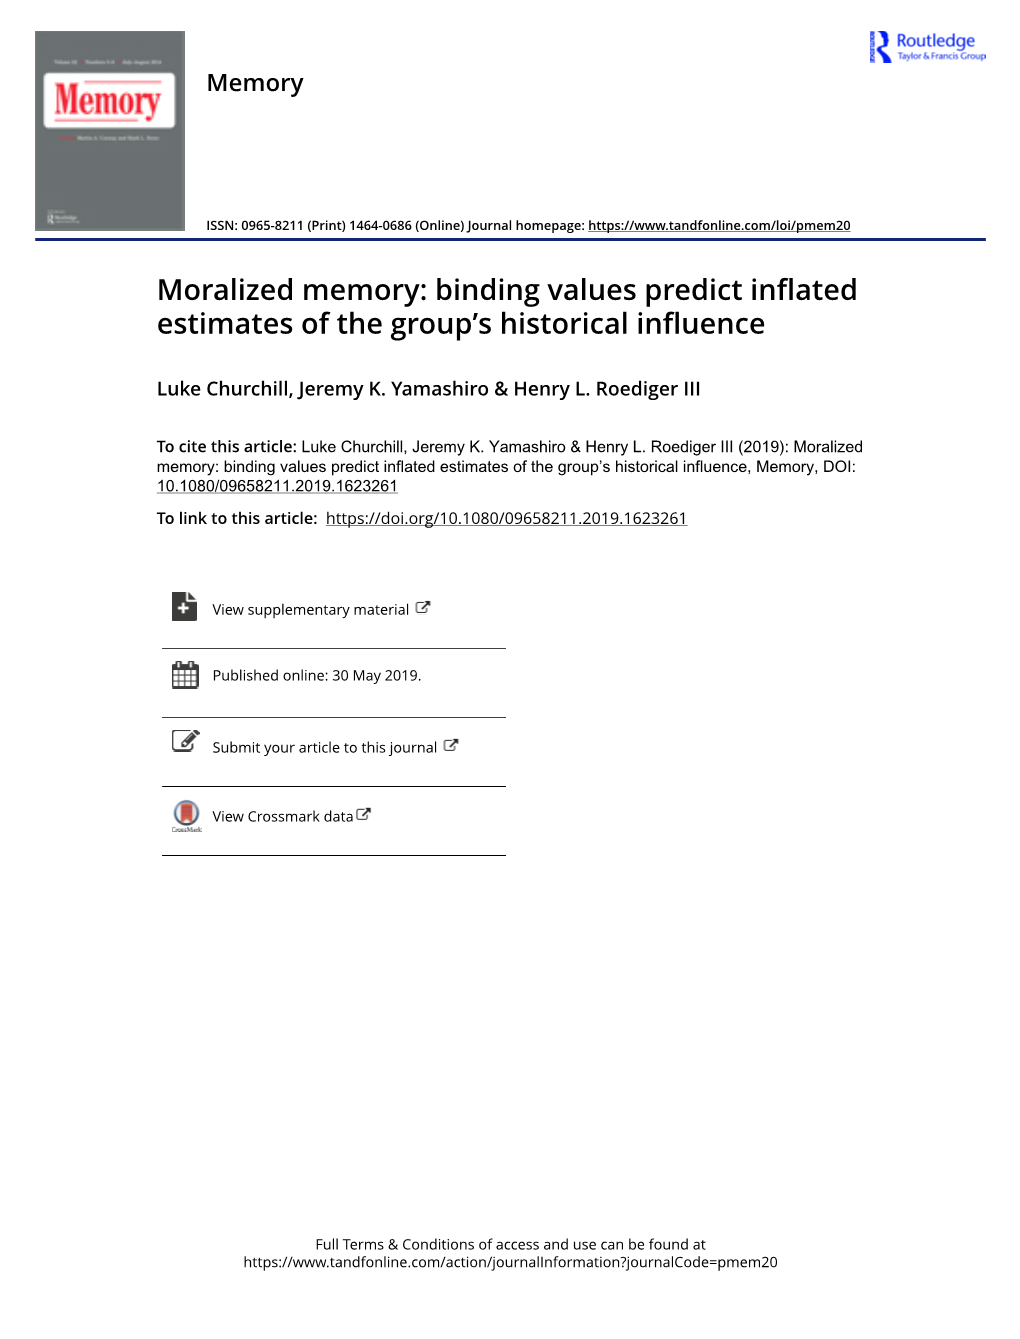 Moralized Memory: Binding Values Predict Inflated Estimates of the Group’S Historical Influence